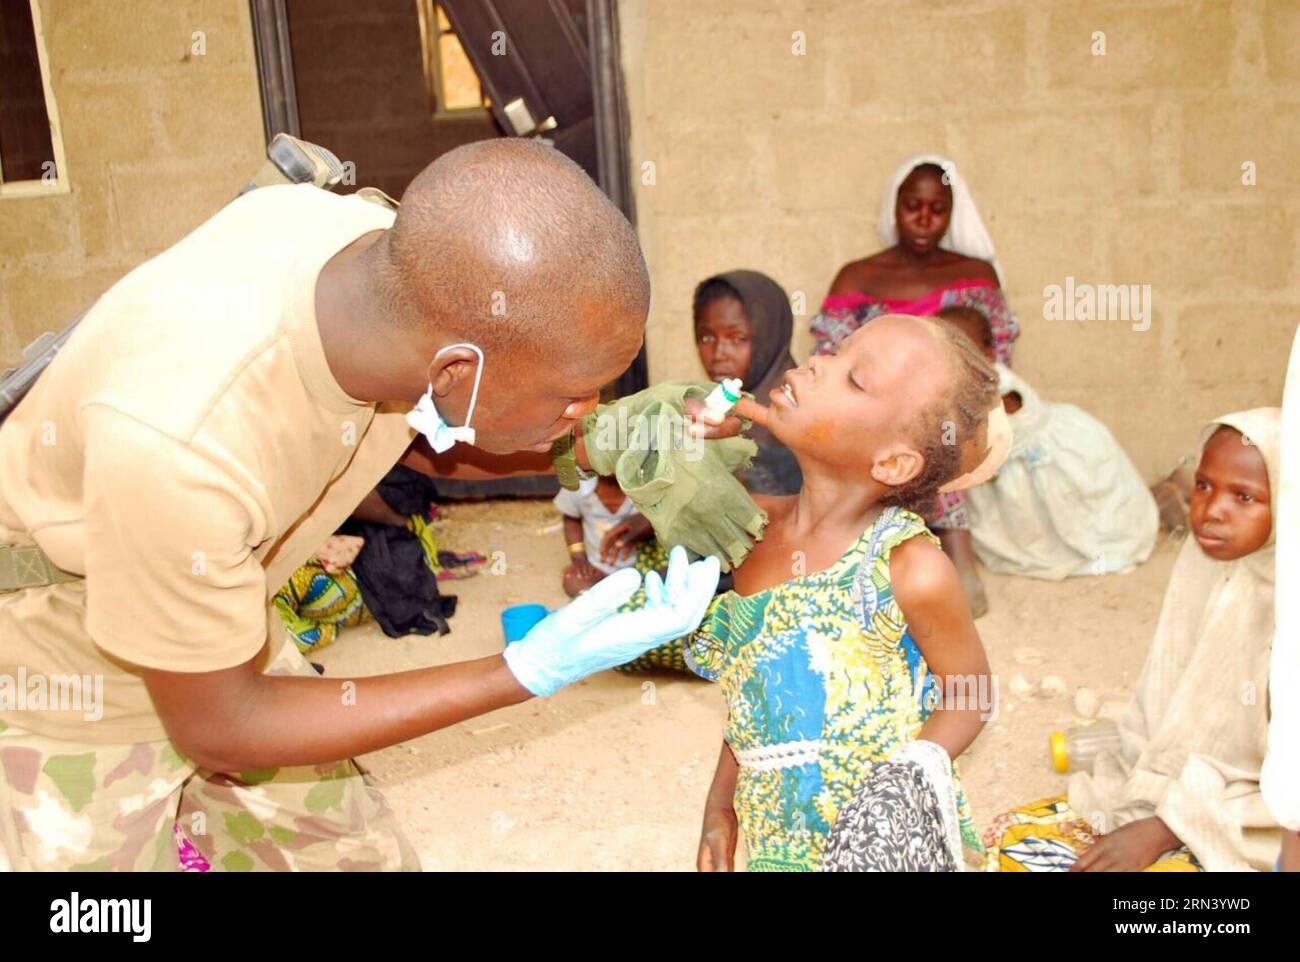 (150430) -- SAMBISA, April 30, 2015 -- One Nigerian military medic attends to a hostage child in Sambisa forest, North-Eastern Nigeria, April 30, 2015. Up to 300 unidentified females have been rescued by Nigerian troops in restive northeast Sambisa forest following a daring and precise operation, a military spokesperson said on Tuesday. ) NIGERIA-SAMBISA-HOSTAGES-RESCUE Dare PUBLICATIONxNOTxINxCHN   April 30 2015 One Nigerian Military Medic Attends to a Hostage Child in  Forest North Eastern Nigeria April 30 2015 up to 300 unidentified females have been Rescued by Nigerian Troops in restive No Stock Photo